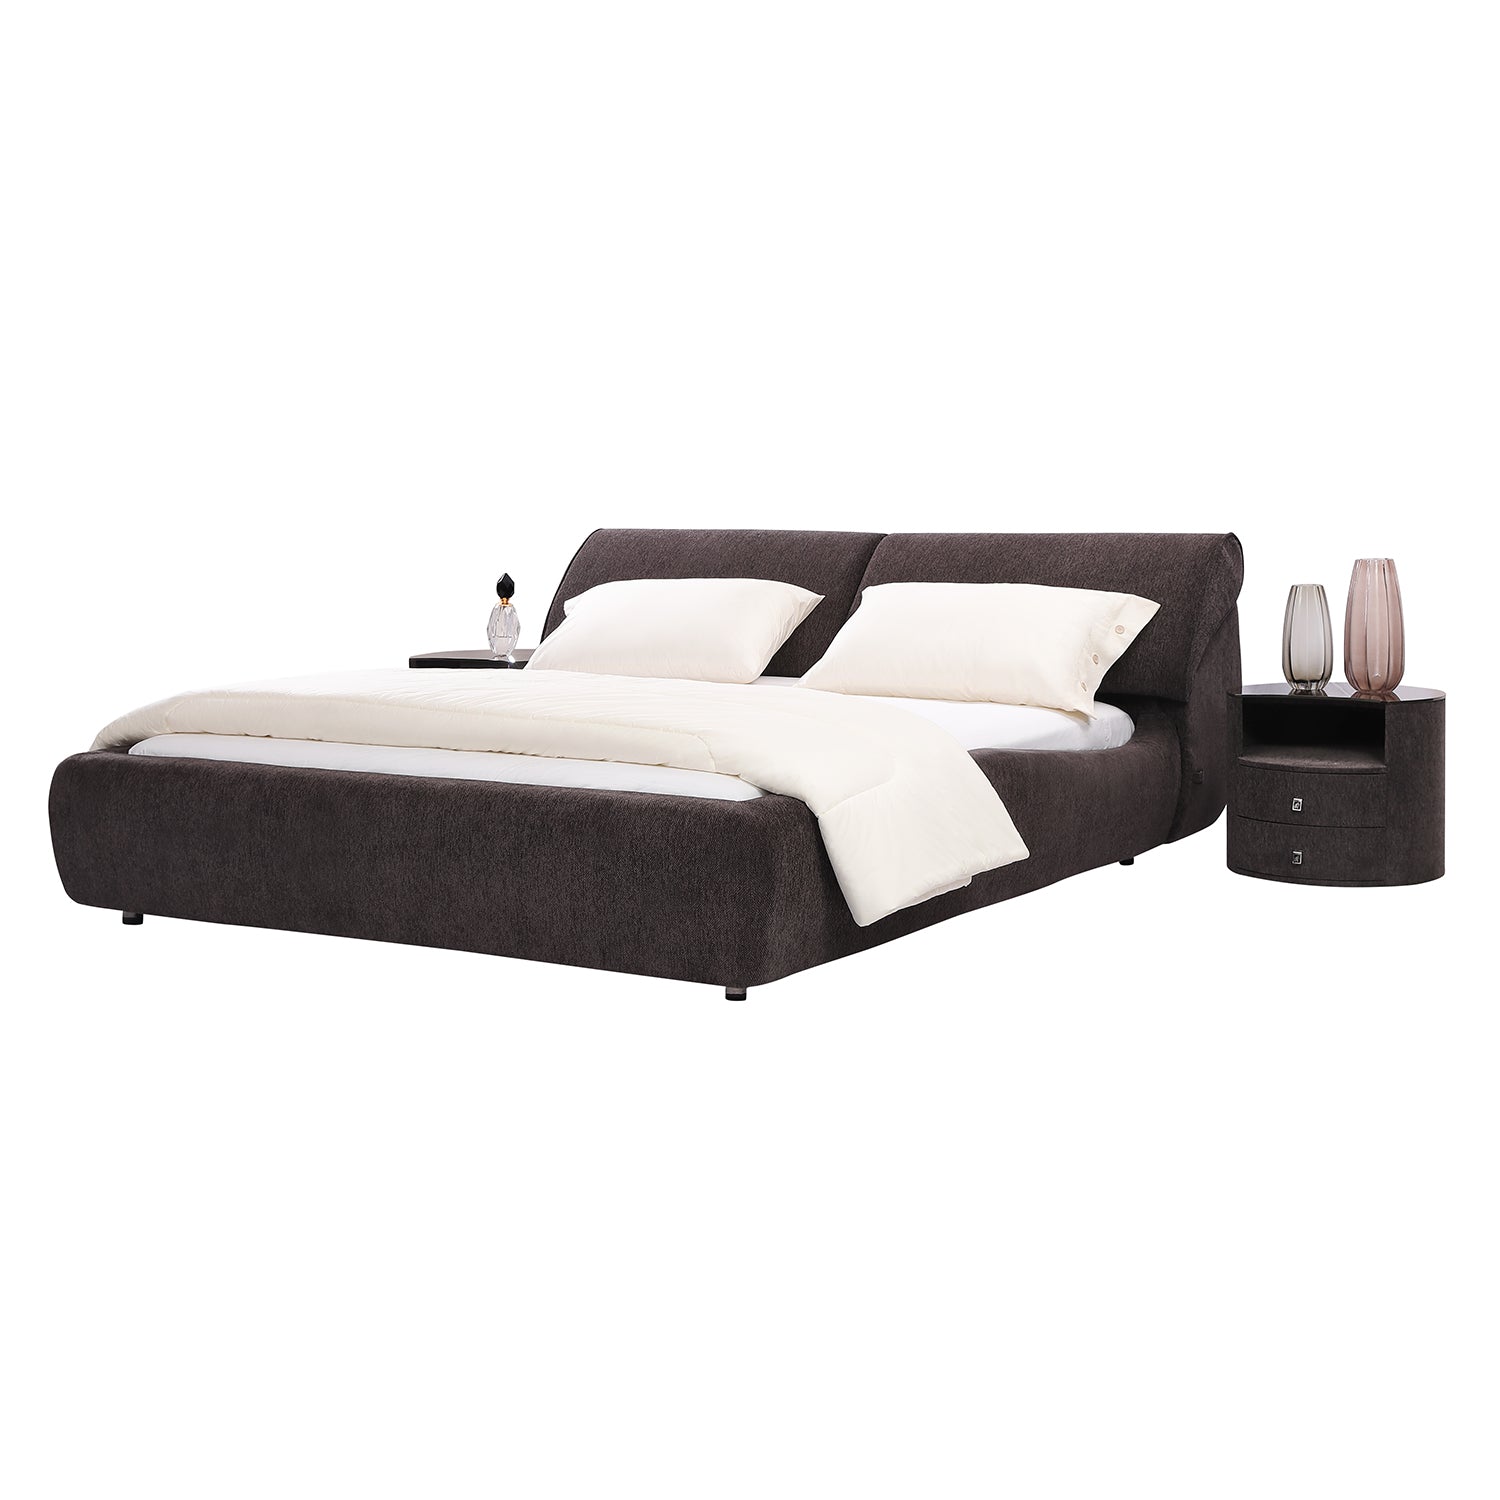 DeRUCCI Bed Frame BZZ4 - 117 with dark fabric, thick cushioned headboard, white bedding, and matching round nightstand with vases and lamp.